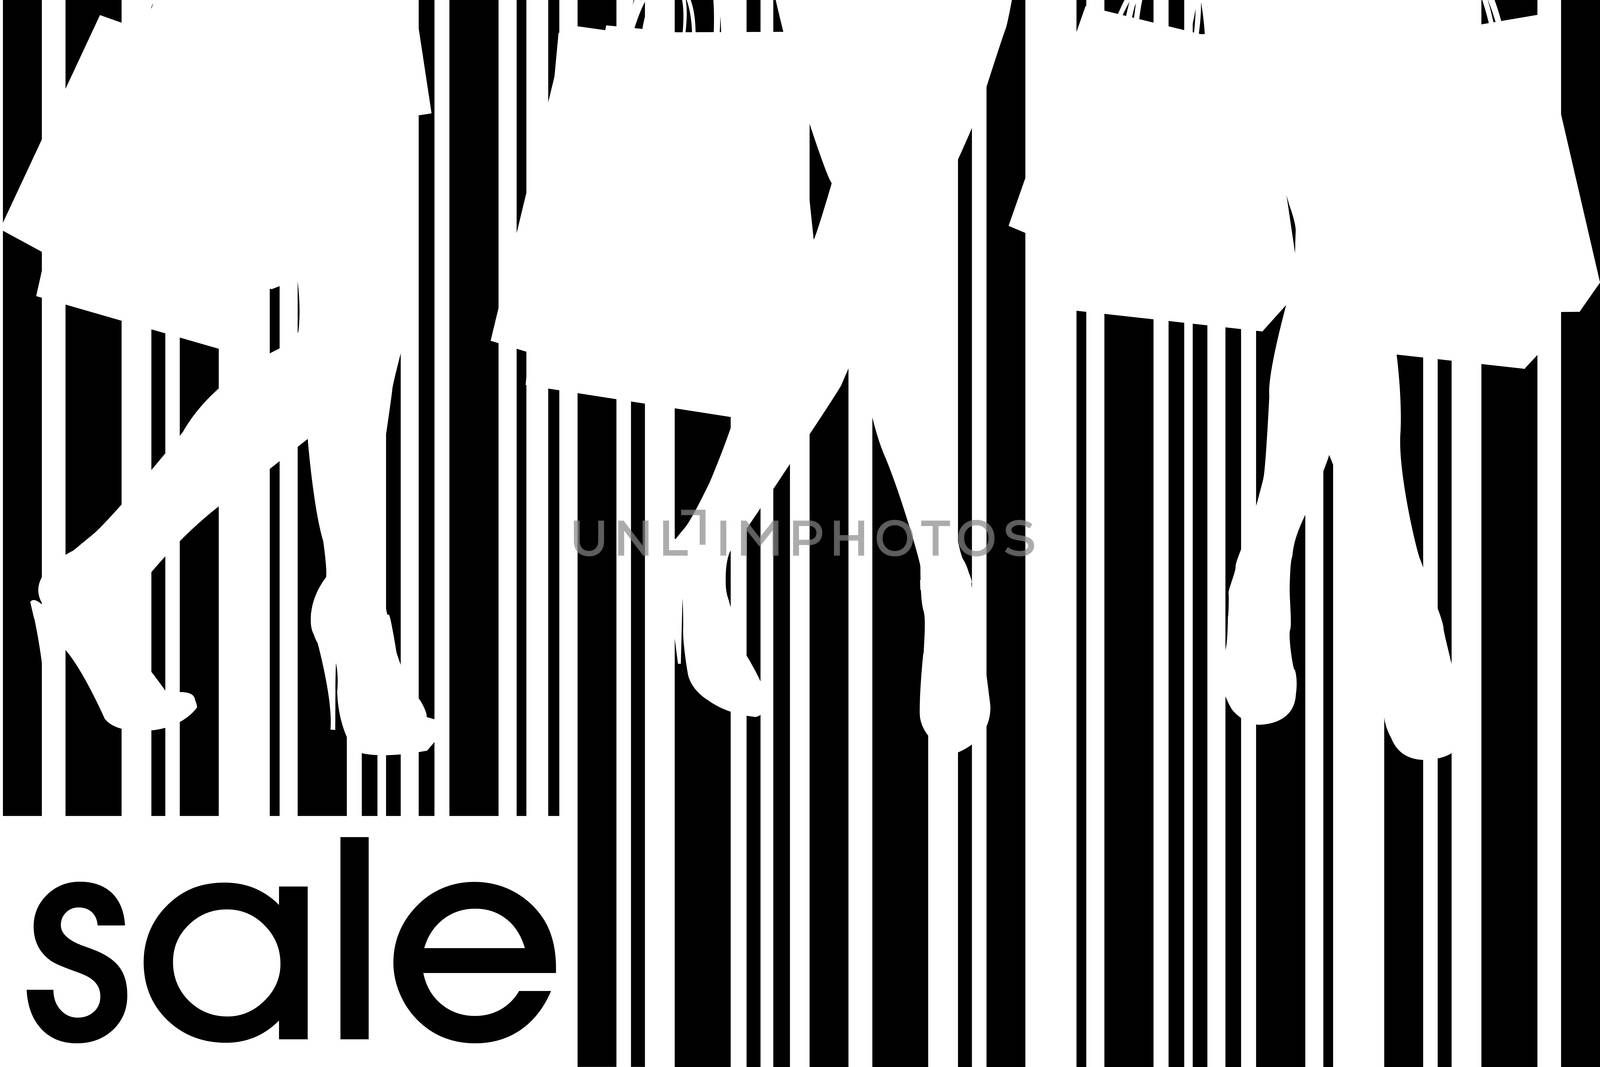 Women with shopping bags on bar code background by hibrida13